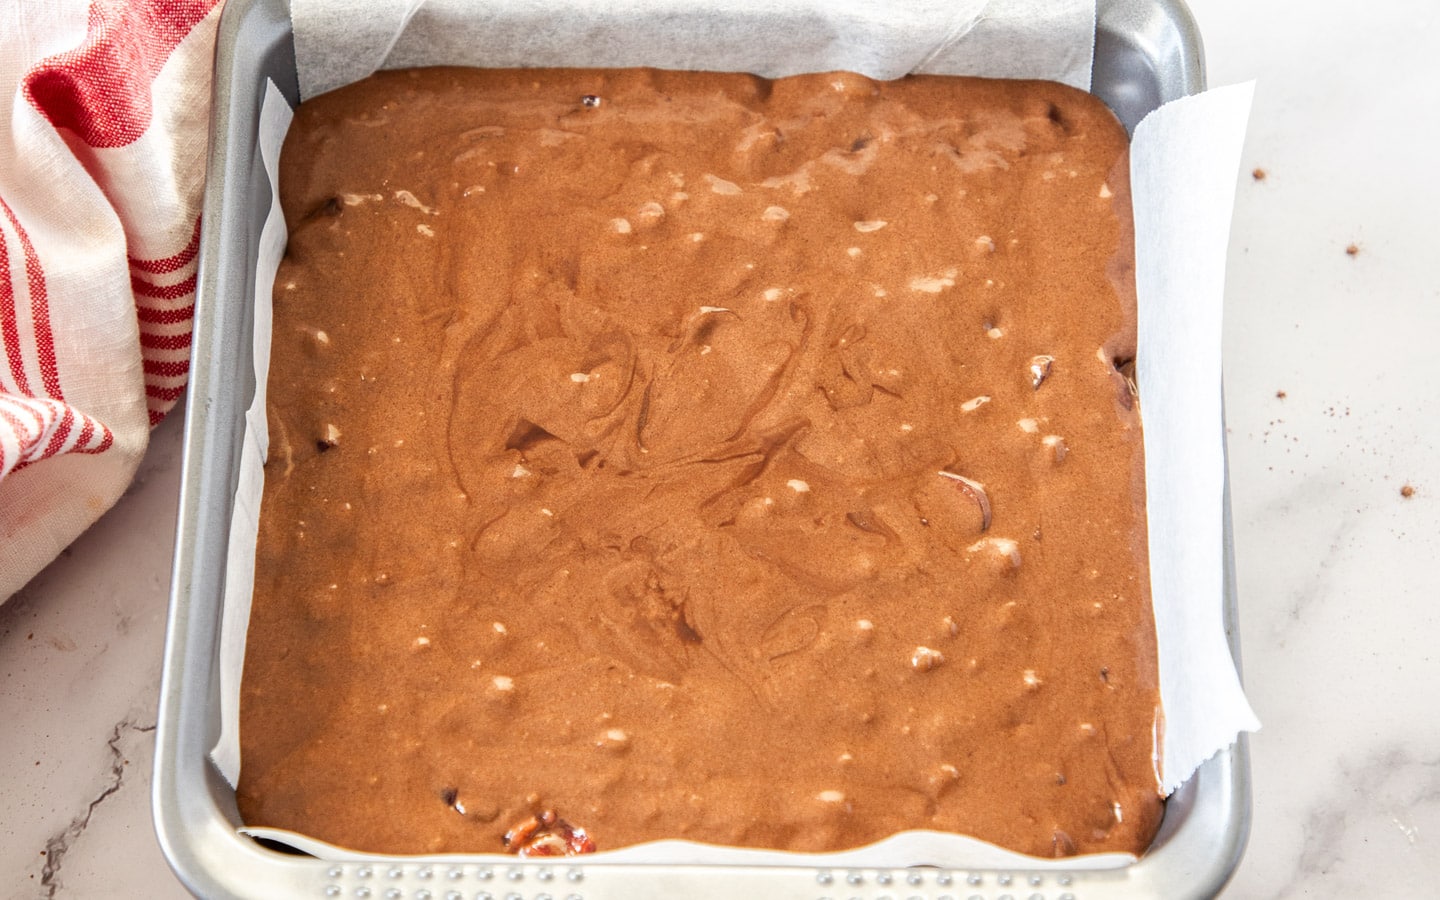 The cherry brownie batter in a baking pan.